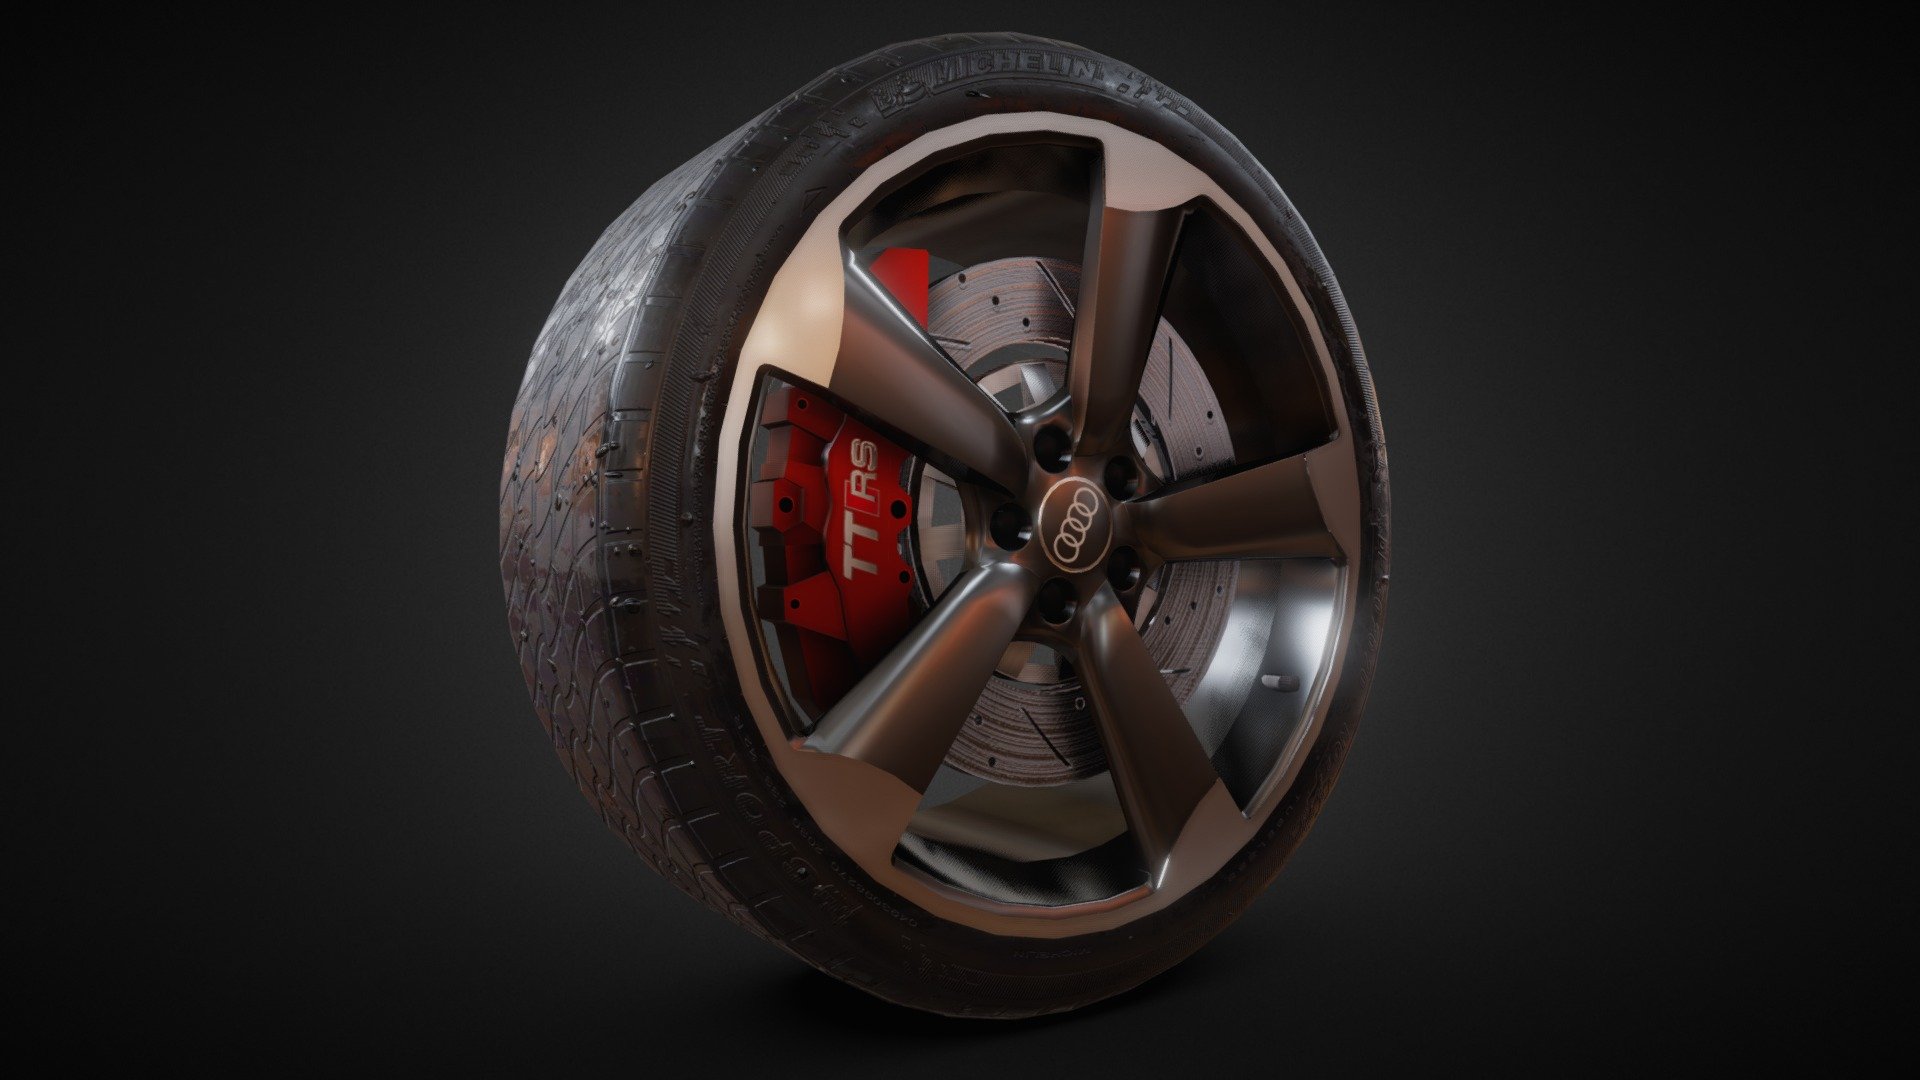 For freelance (I model what you need for payment) or any other questions, contact me directly:

Discord: Tigr#1545

Decided to publish the wheel from my Audi TT and make it downloadable. ¯_(ツ)_/¯ - Audi TT Wheel - Download Free 3D model by TGRRRR 3d model